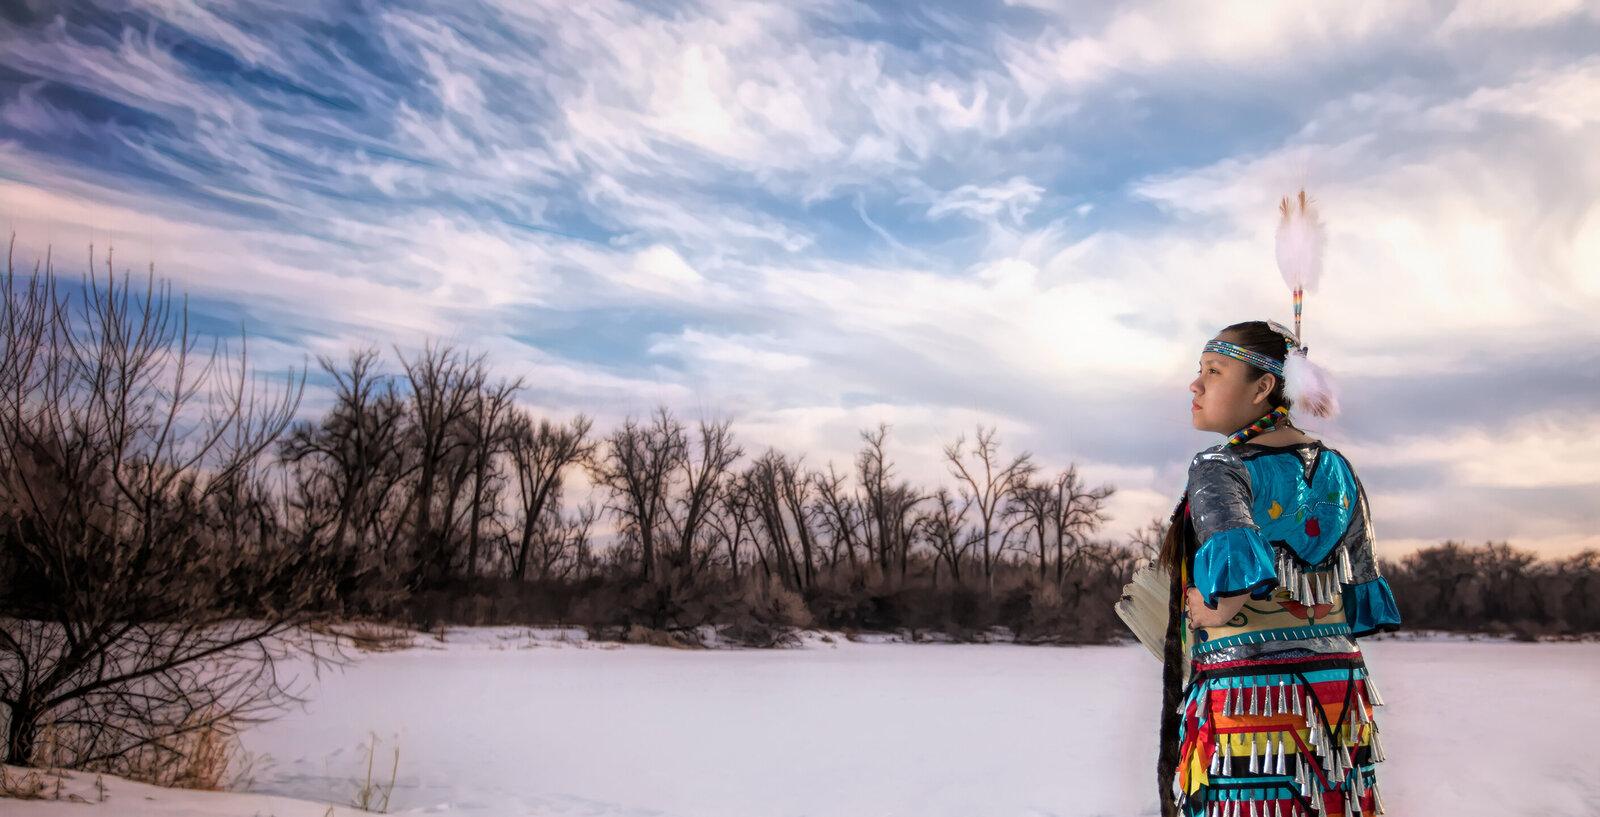 Senior Pictures in Native American Regalia. Blue jingle dress. Beautiful picture of client in the winter, wearing dress at River Front Park, Billings, MT, in winter.